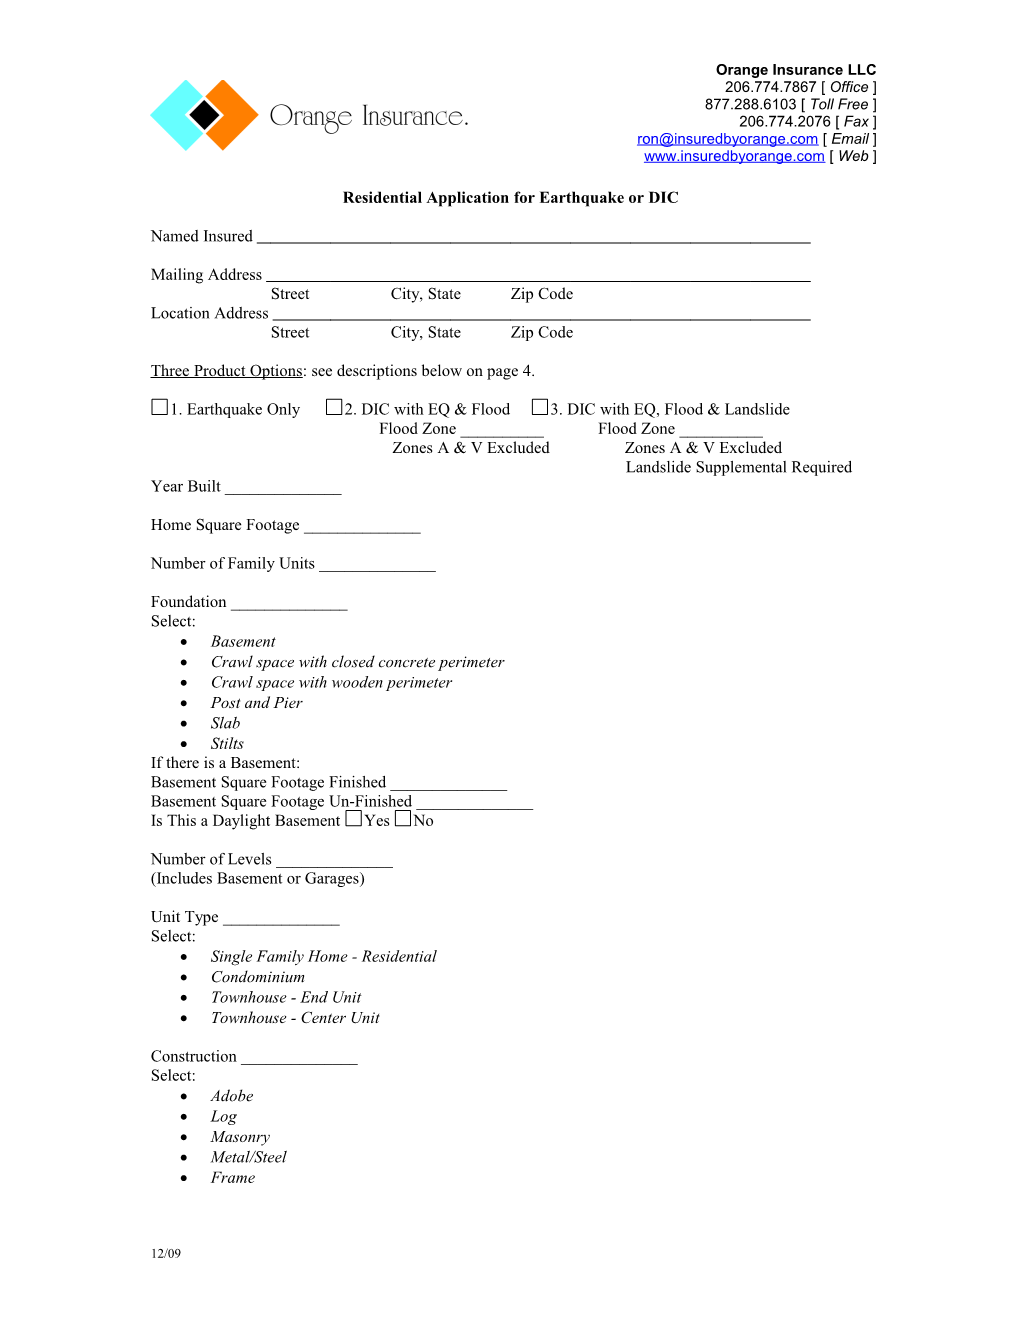 Residential Application for Dic Or Earthquake